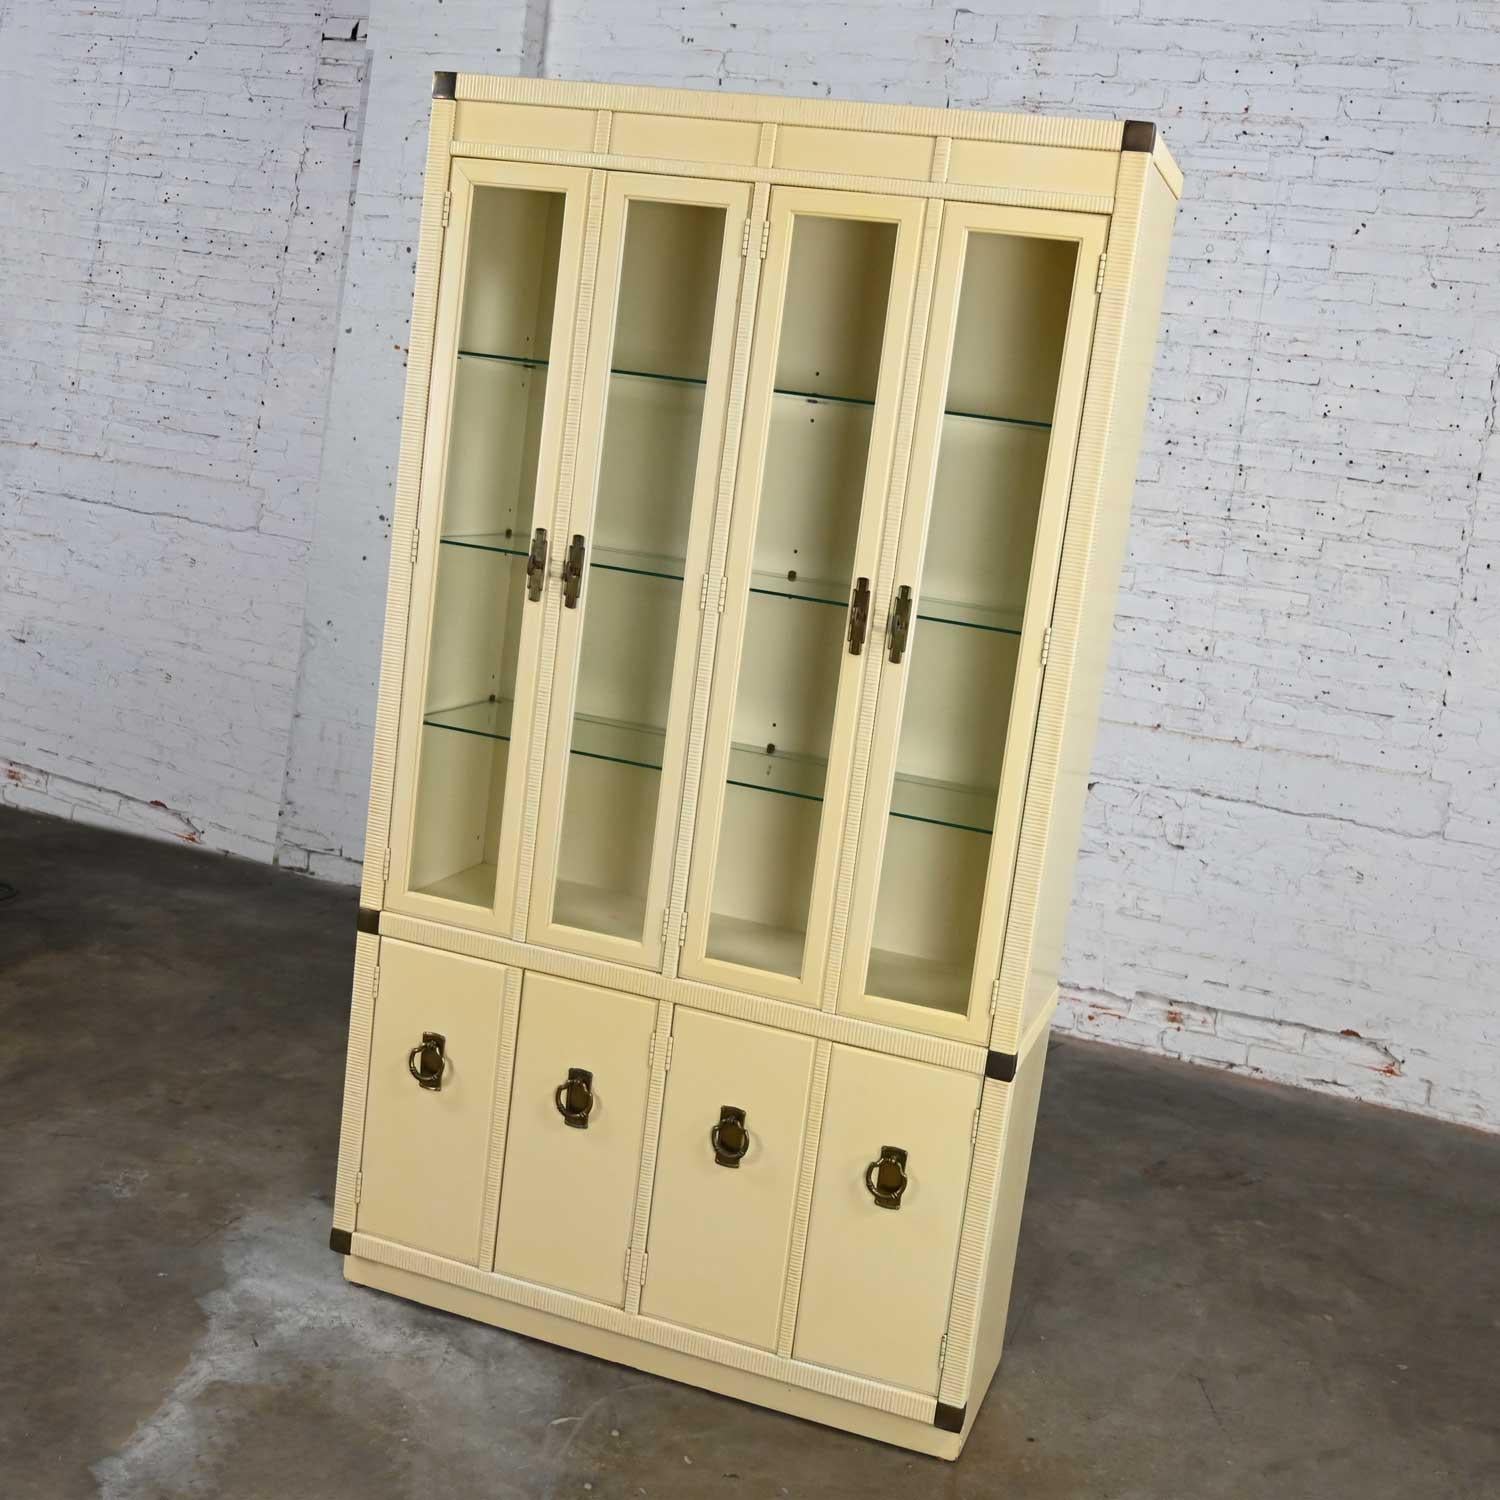 Lovely vintage Chinoiserie or Campaign style off-white lighted display cabinet with faux wrapped rattan edges by Drexel. Beautiful condition, keeping in mind that this is vintage and not new so will have signs of use and wear. There are a few dings